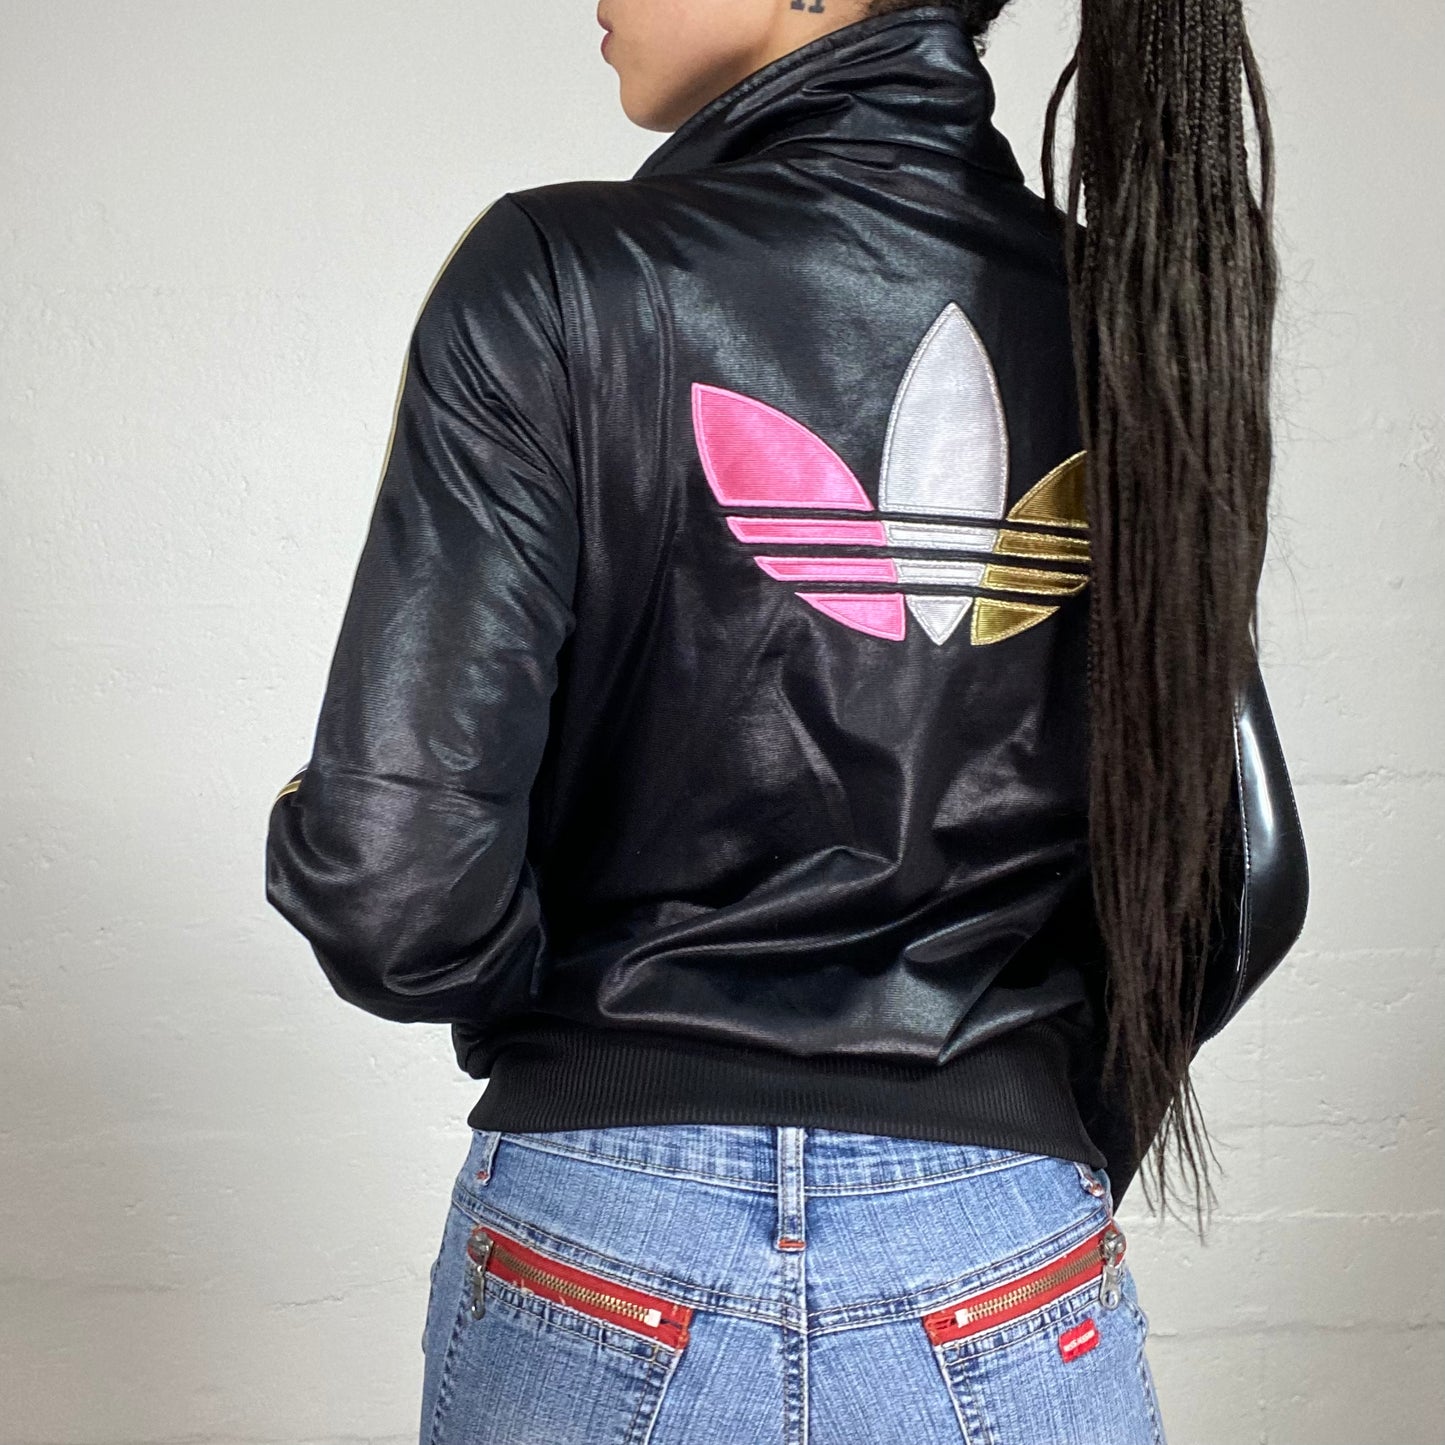 Vintage 80's Style Adidas Popstar Shimmer Black Zip Up with Pink Accents and Back Logo Embroidery (40)